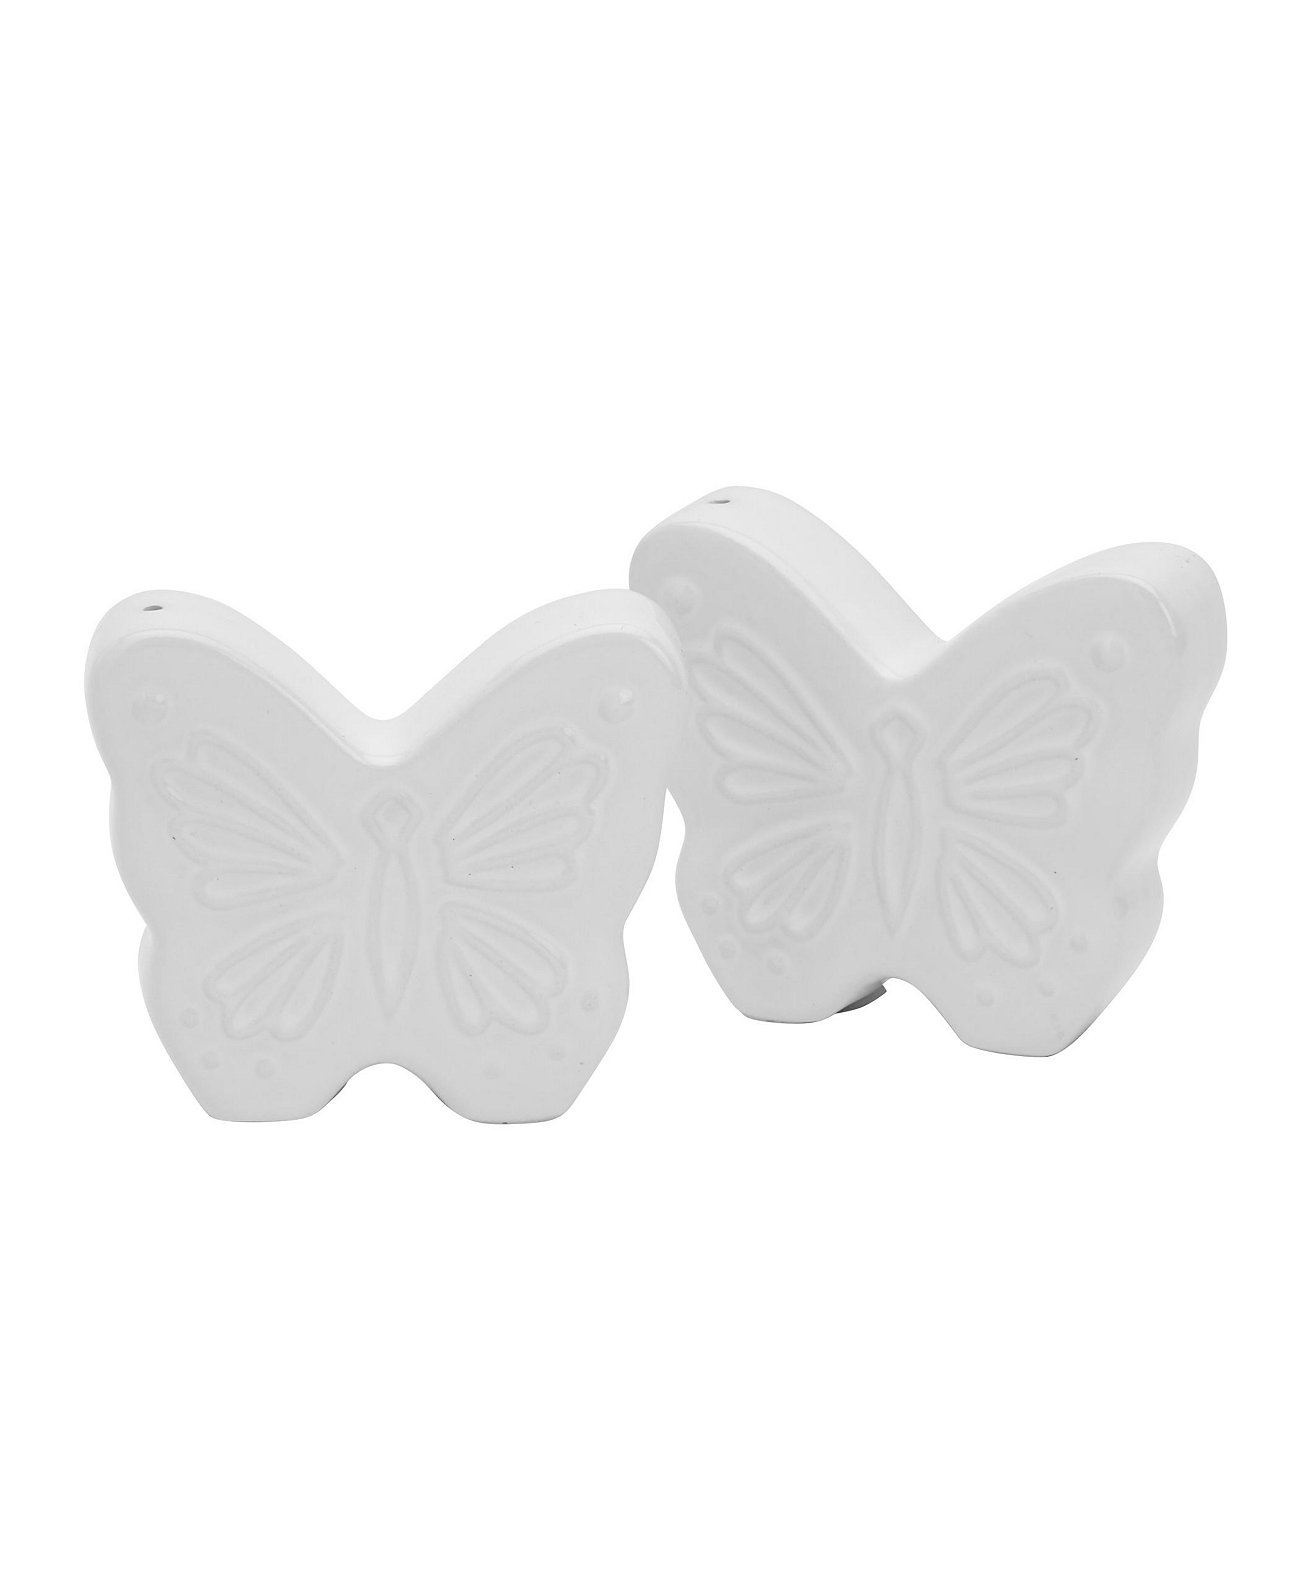 Butterfly Salt and Pepper Shakers, Set of 2 Dolly Parton